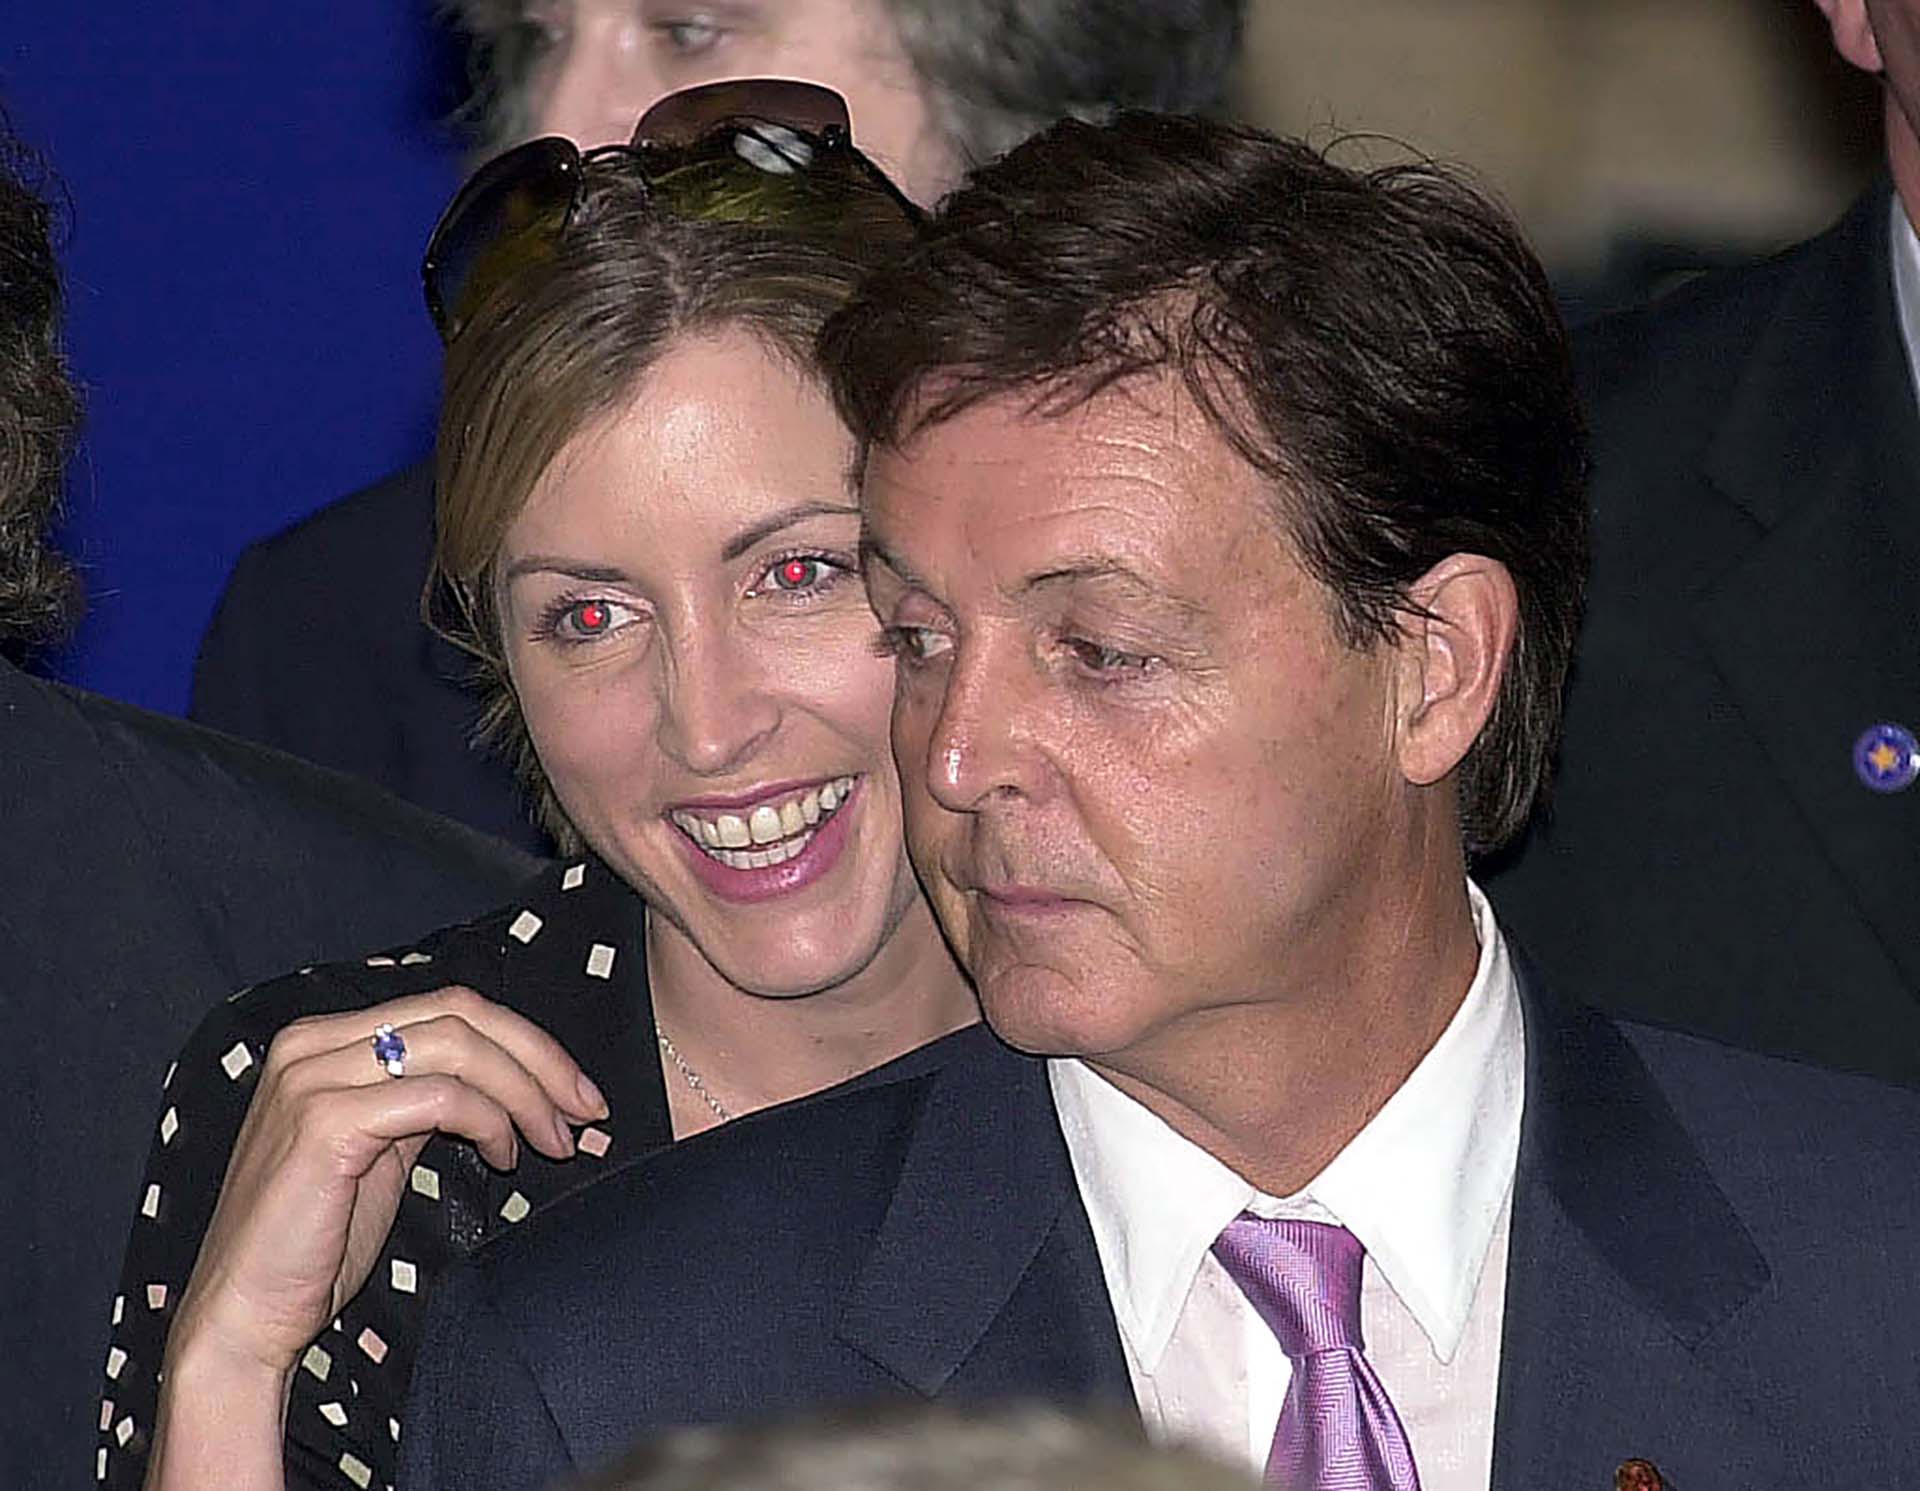 LIVERPOOL, ENGLAND - JULY 25: Sir Paul McCartney, with his wife, Heather Mills, at the Walker Art Gallery on July 25, 2002 in Liverpool, England. (Photo by Anwar Hussein/Getty Images)